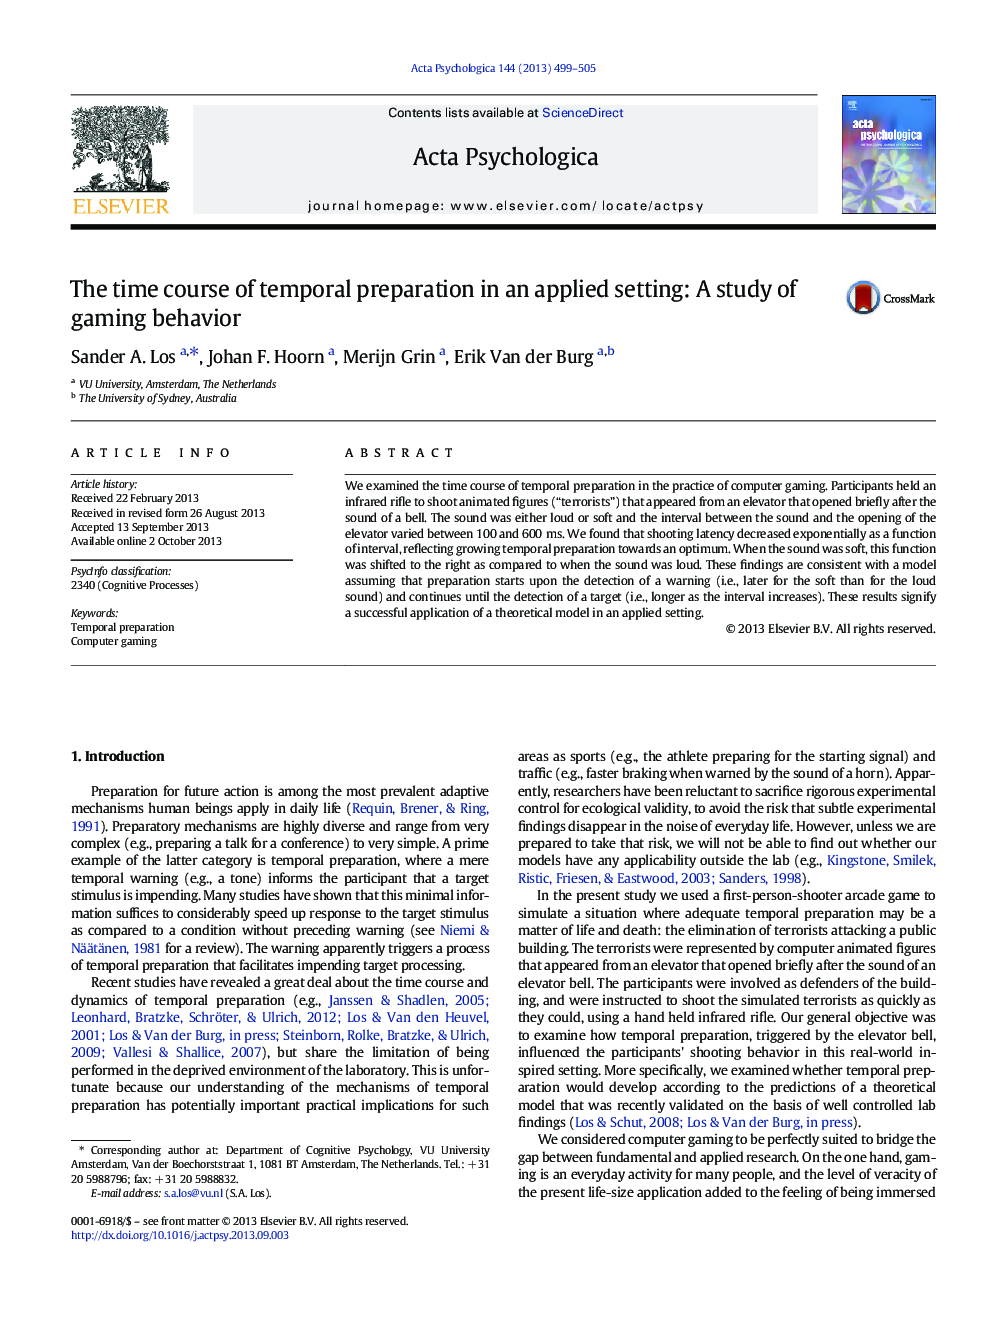 The time course of temporal preparation in an applied setting: A study of gaming behavior